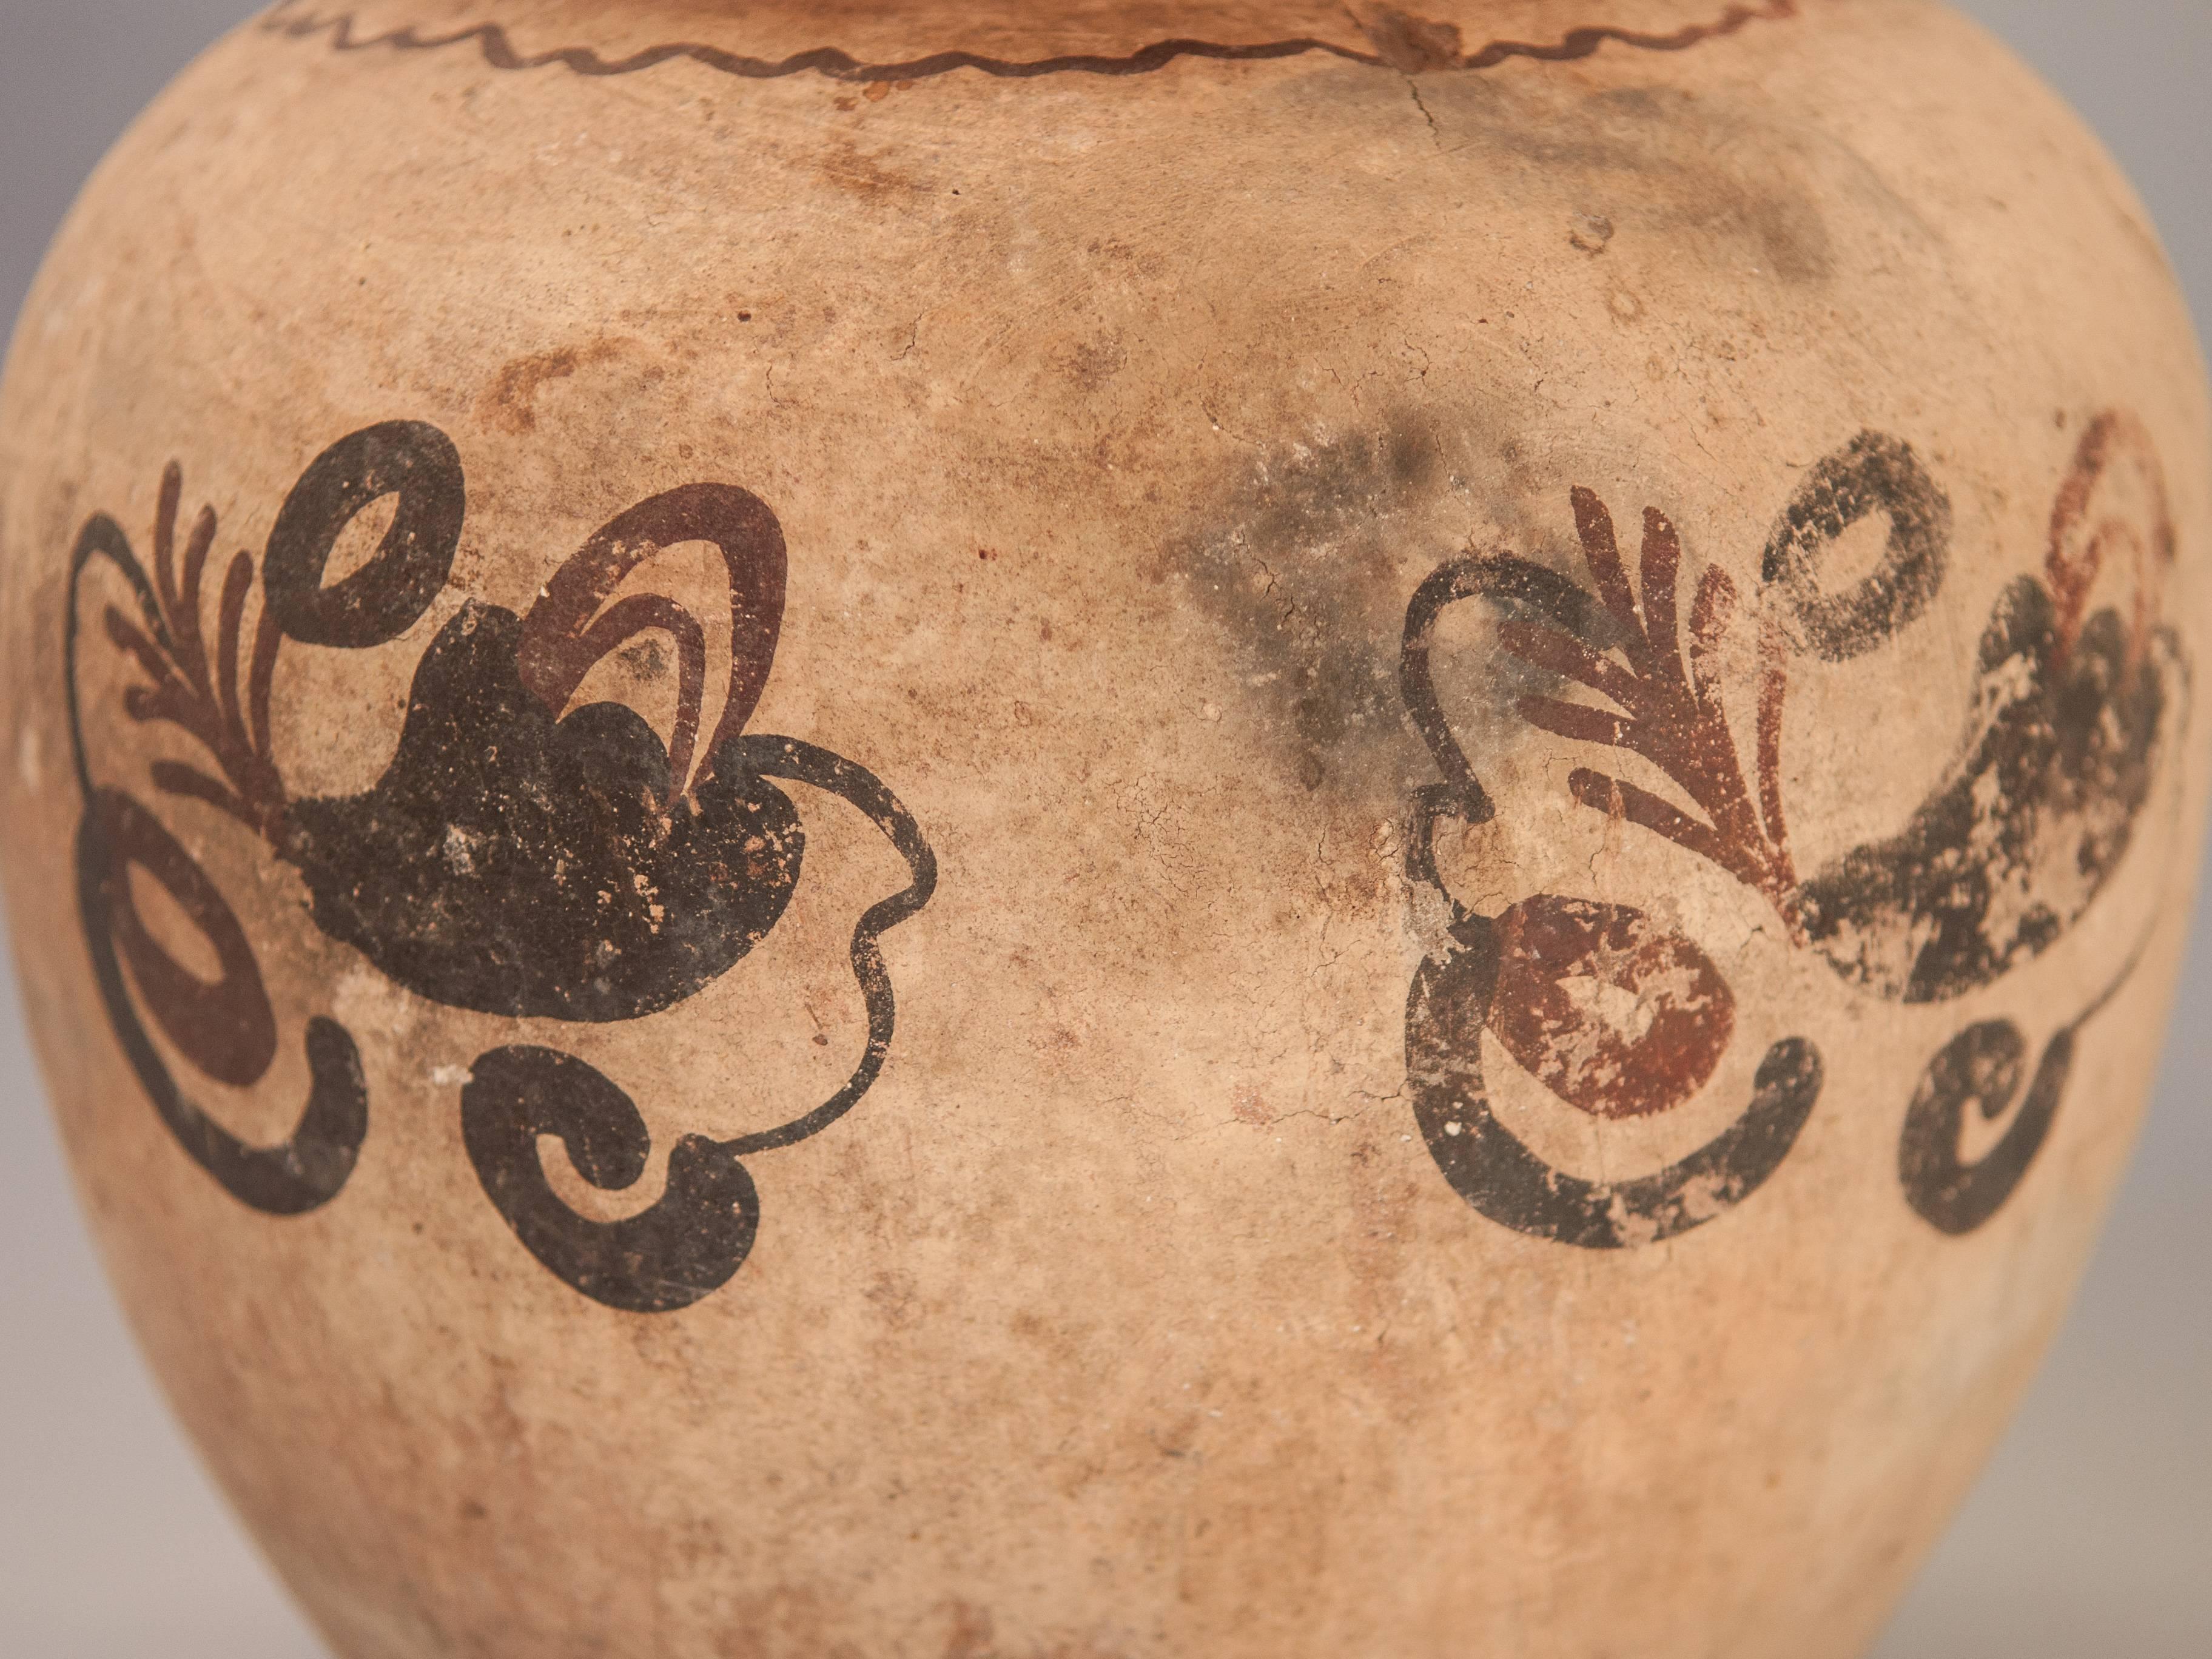 Indonesian Earthenware Pot with Floral Design Mid-20th Century, Molucca Islands, Indonesia